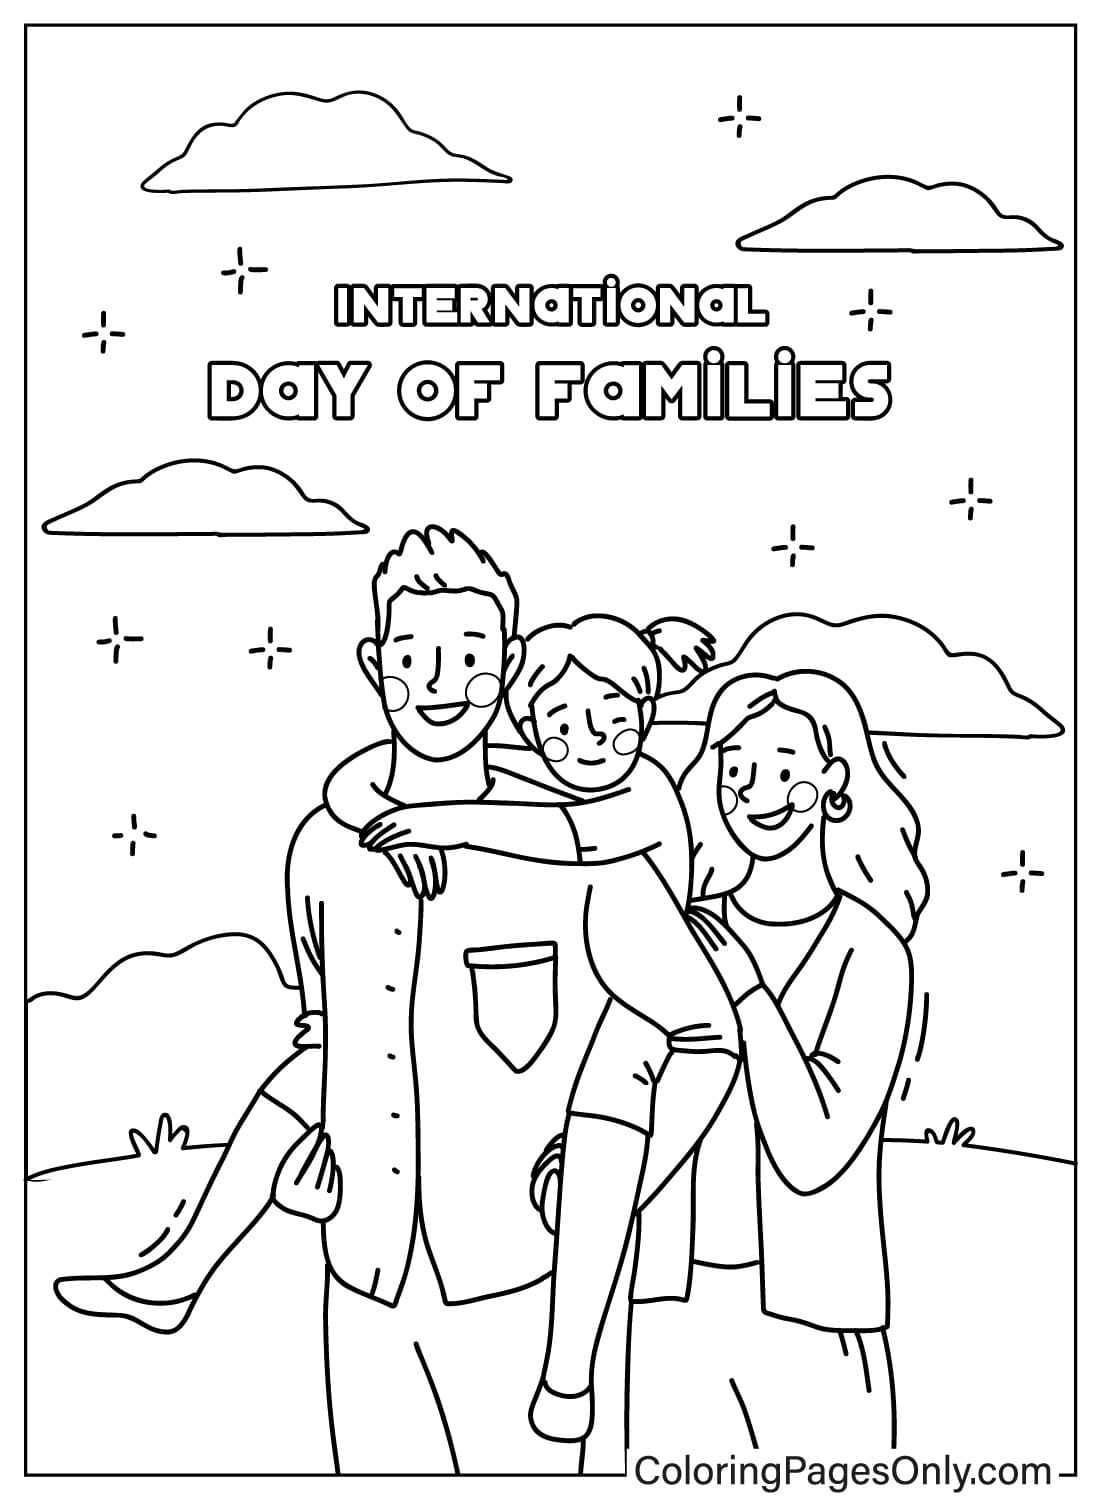 International Day of Families May Coloring Sheet for Kids from May